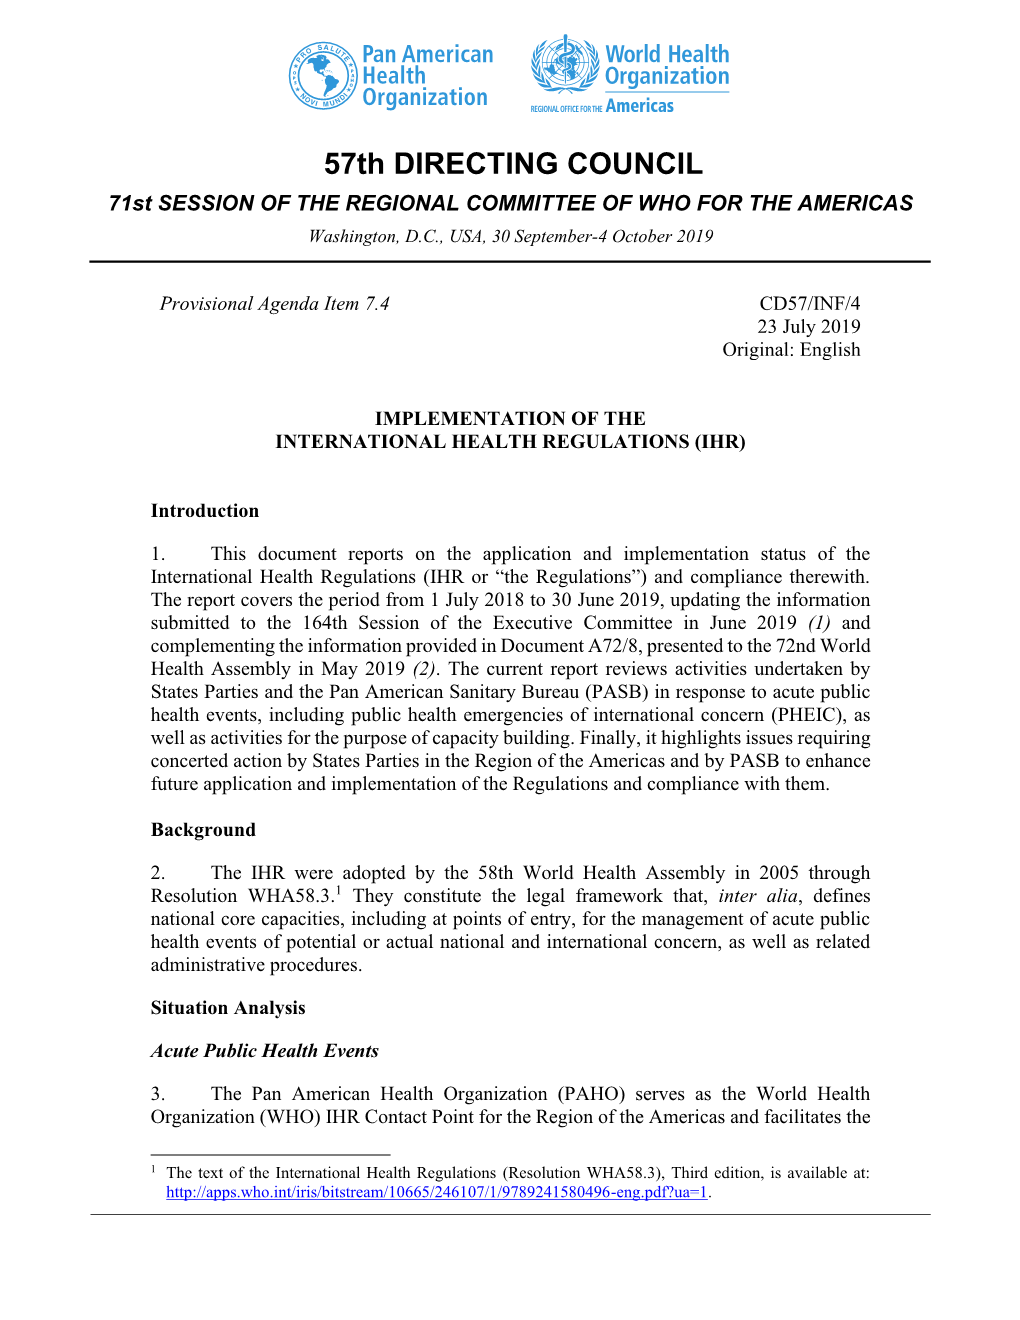 57Th DIRECTING COUNCIL 71St SESSION of the REGIONAL COMMITTEE of WHO for the AMERICAS Washington, D.C., USA, 30 September-4 October 2019